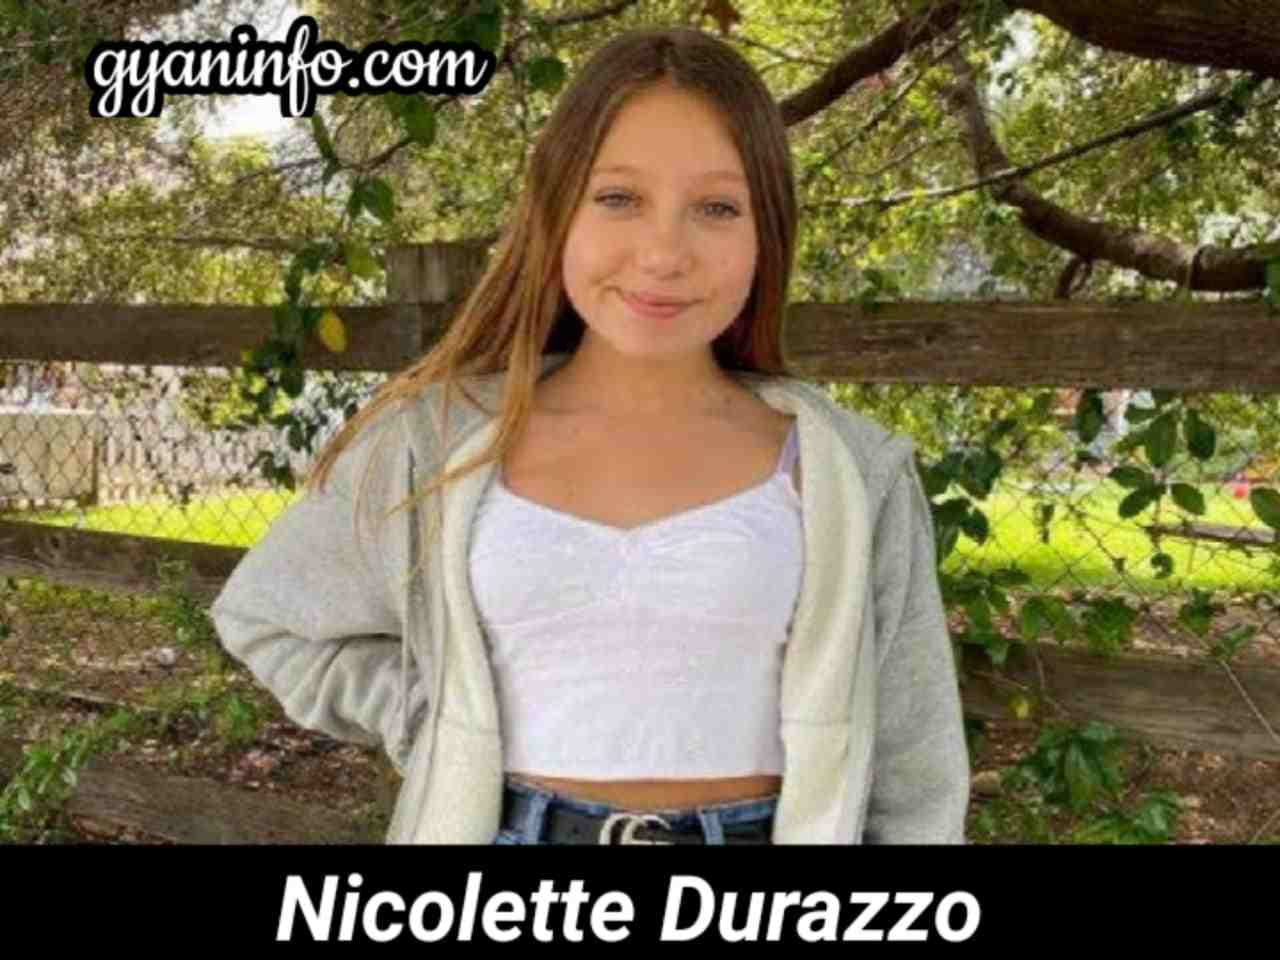 Nicolette Durazzo Biography, Height, Age, Weight, Body Measurements, Boyfriend, Family, Parents, Net Worth, Wiki & More